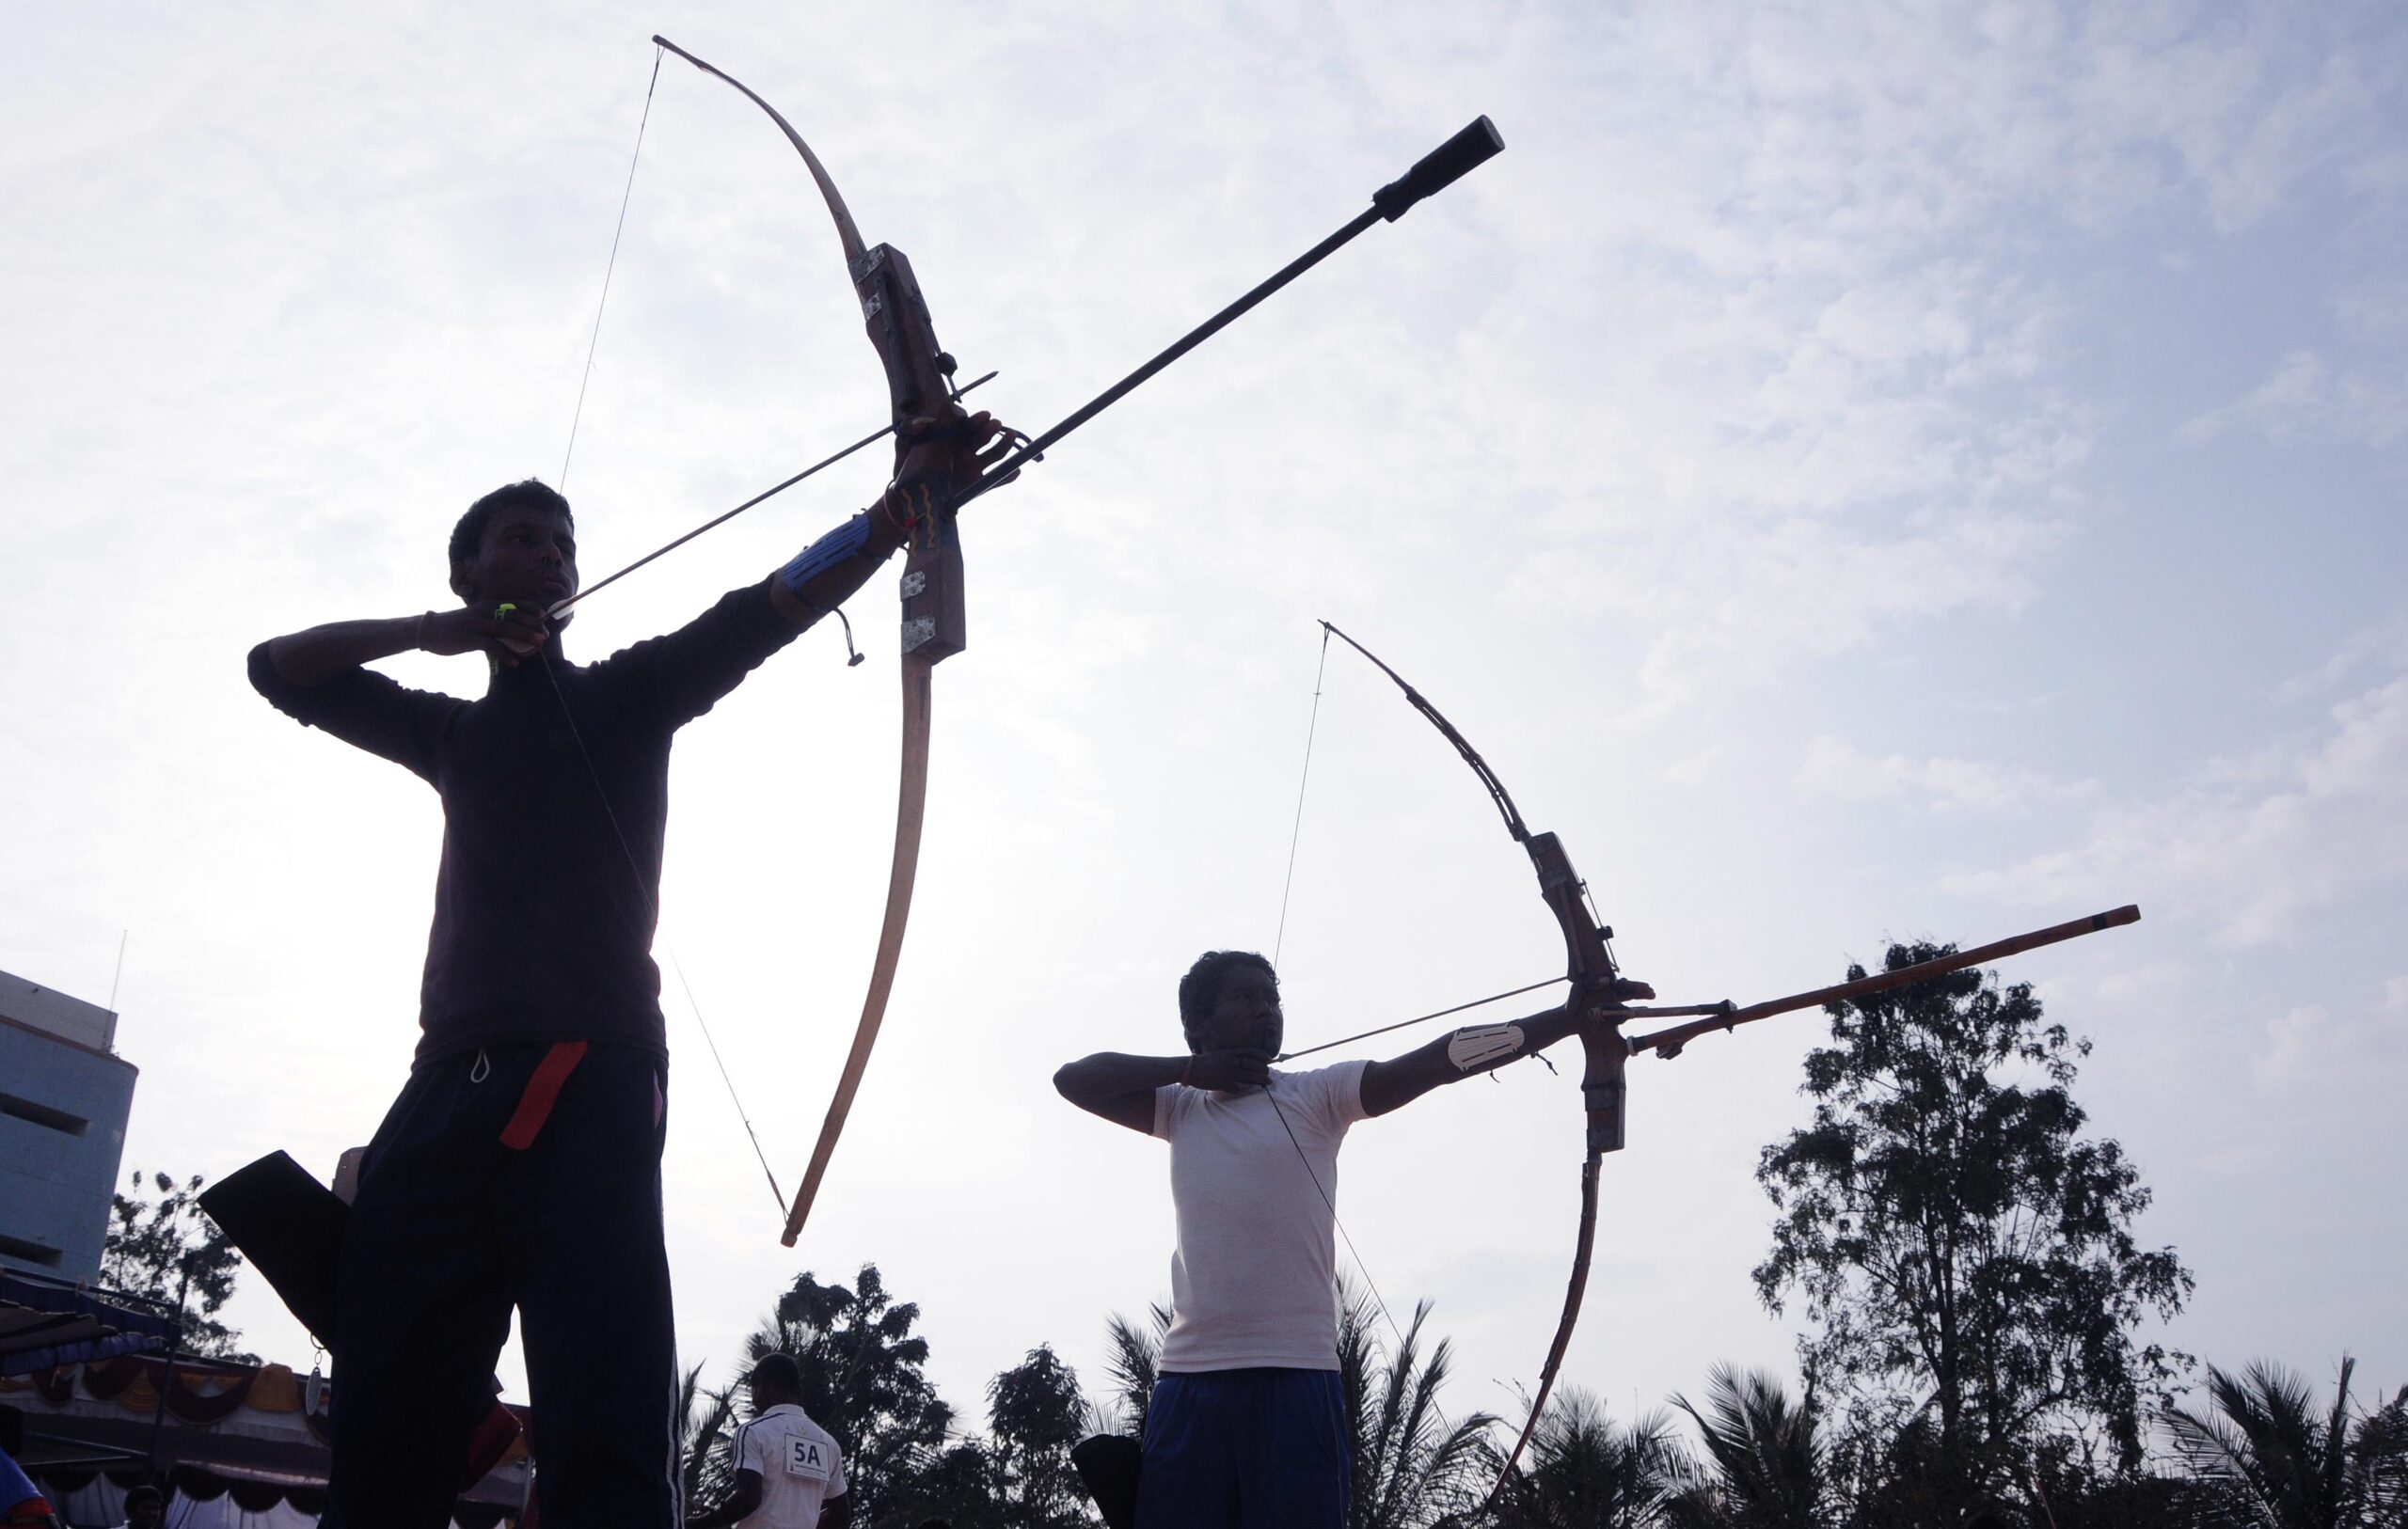 Participants in action, during 2nd day of the 17th National Varanasi Archery Competition organized by Akhil Bharatiya Varanasi Kalyan Ashram at Vagedvi School, in Bangalore on 27th of December 2014